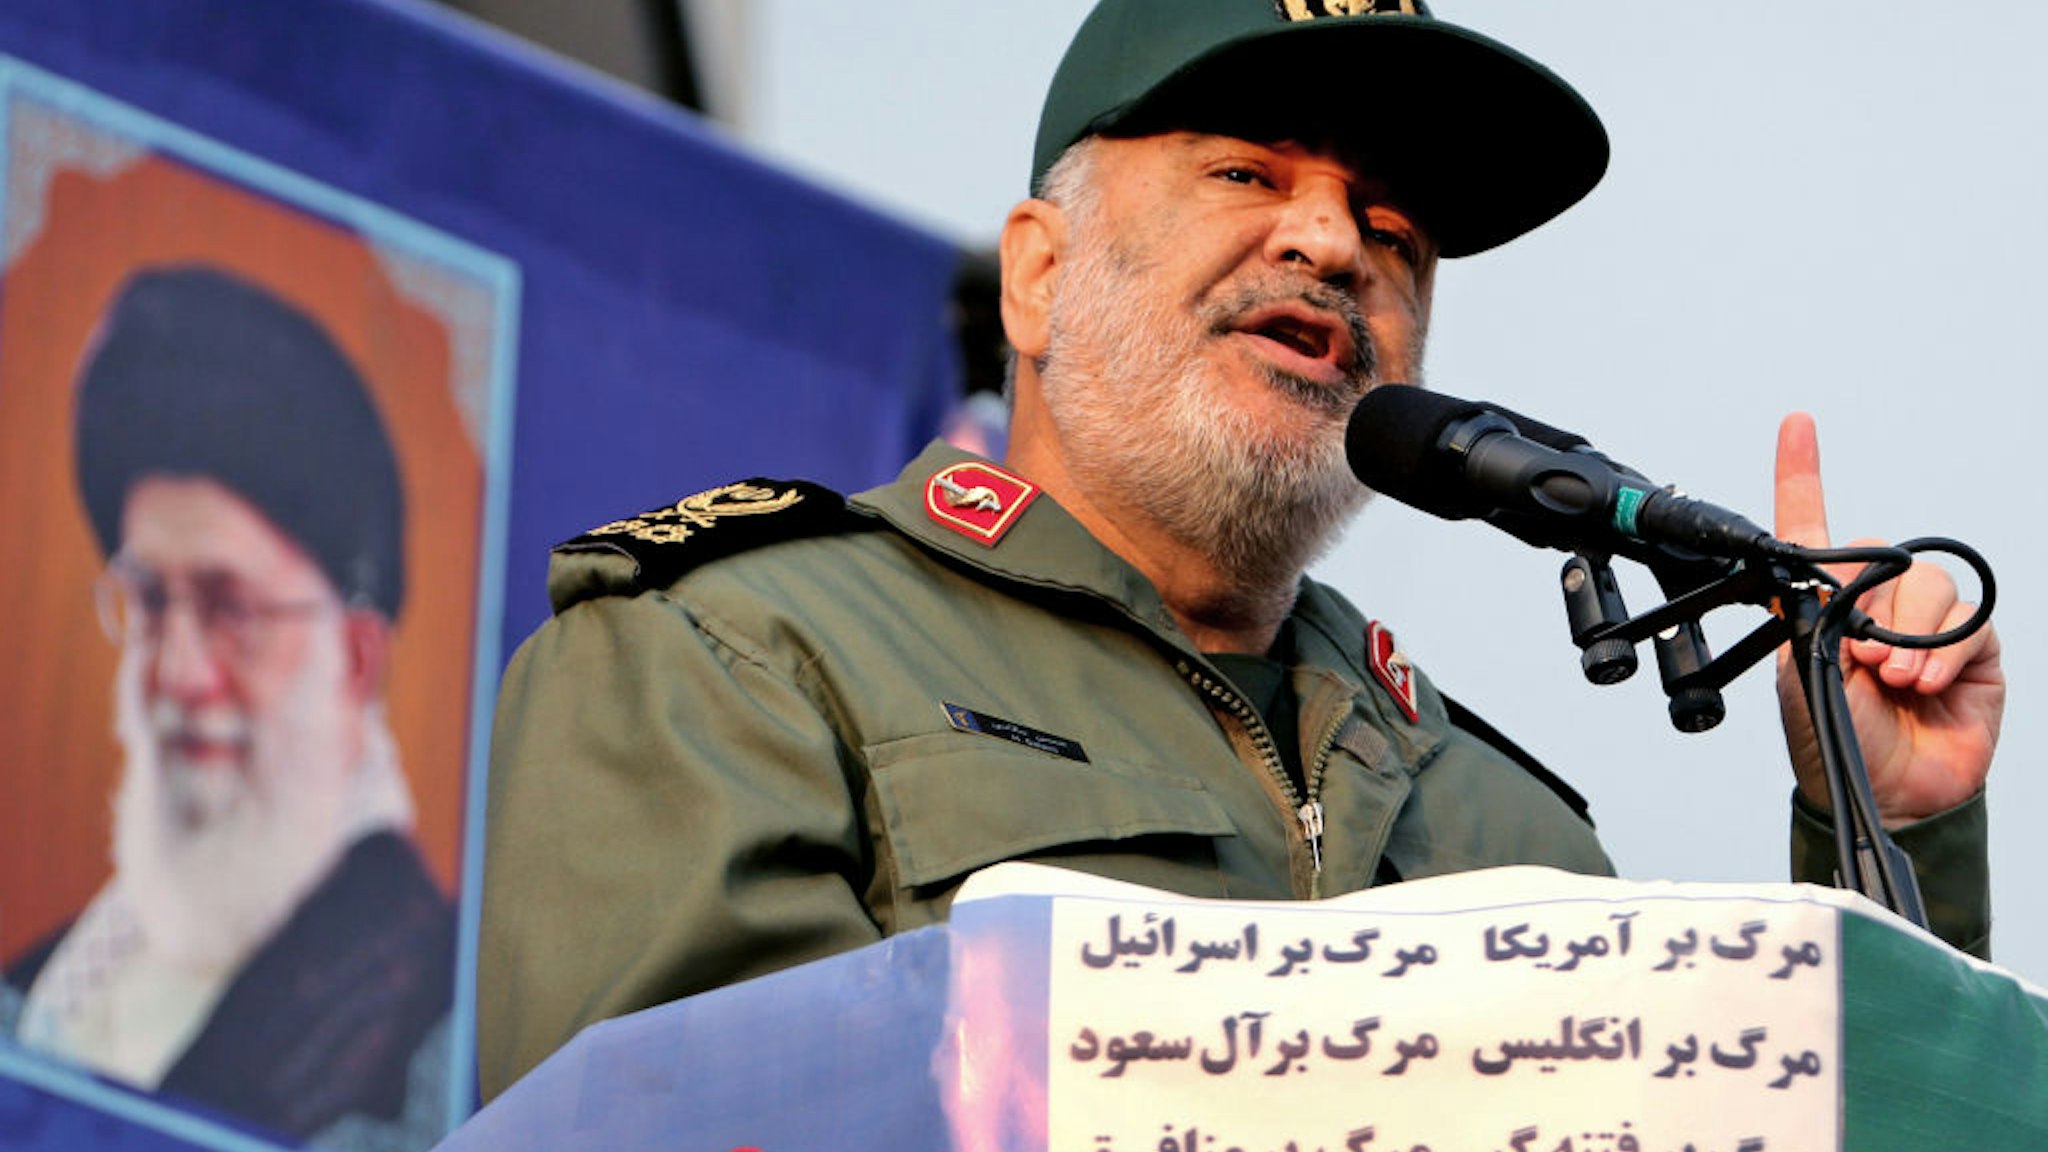 Iranian Revolutionary Guards commander Major General Hossein Salami speaks during a pro-government rally in the capital Tehran's central Enghelab Square on November 25, 2019.